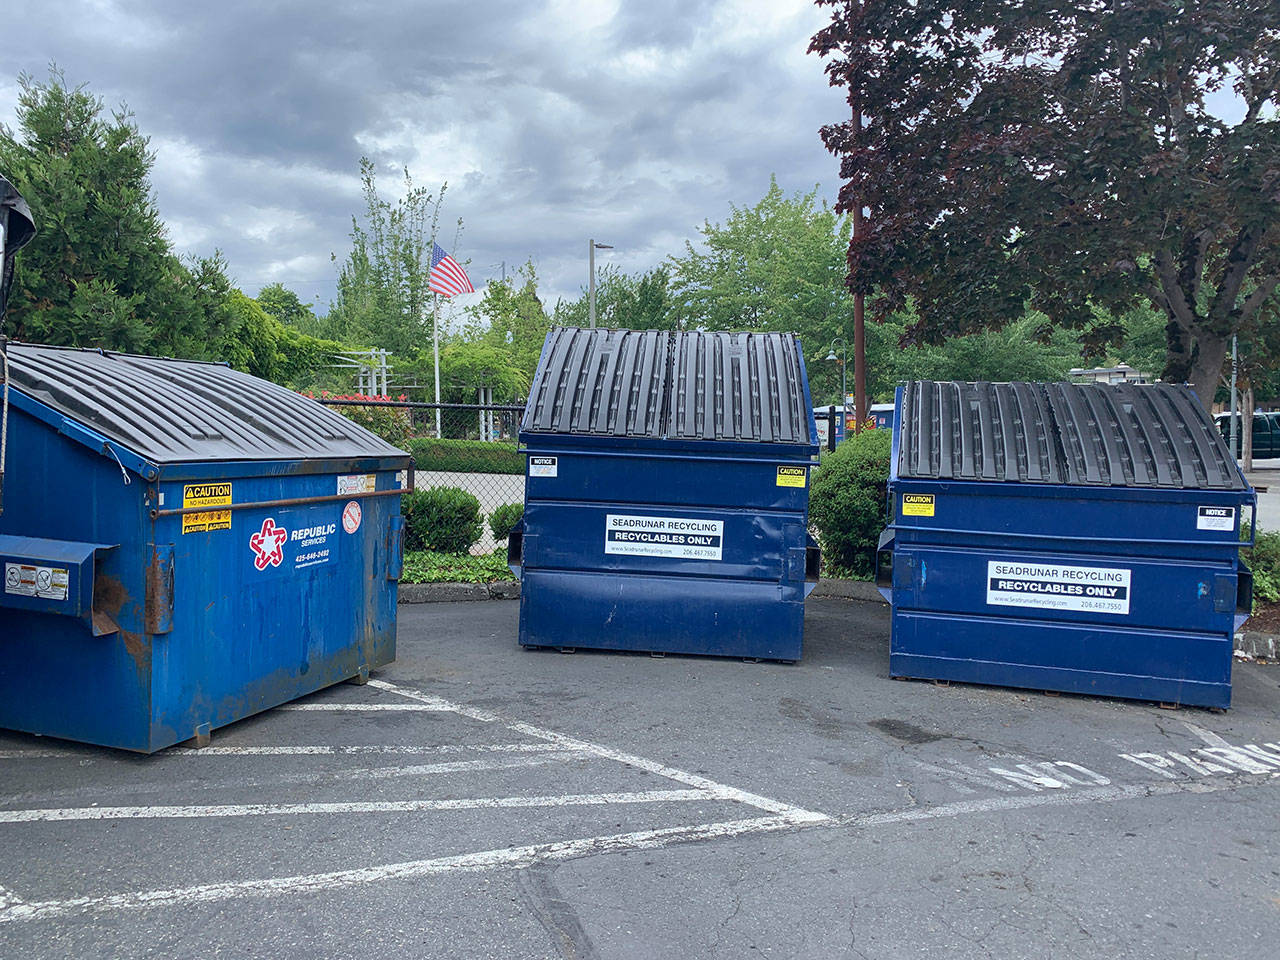 Recology will soon be replacing Republic as Mercer Island’s garbage removal service. They will be responsible for collecting compost, garbage and recycled material for residents. Madeline Coats/Staff photo